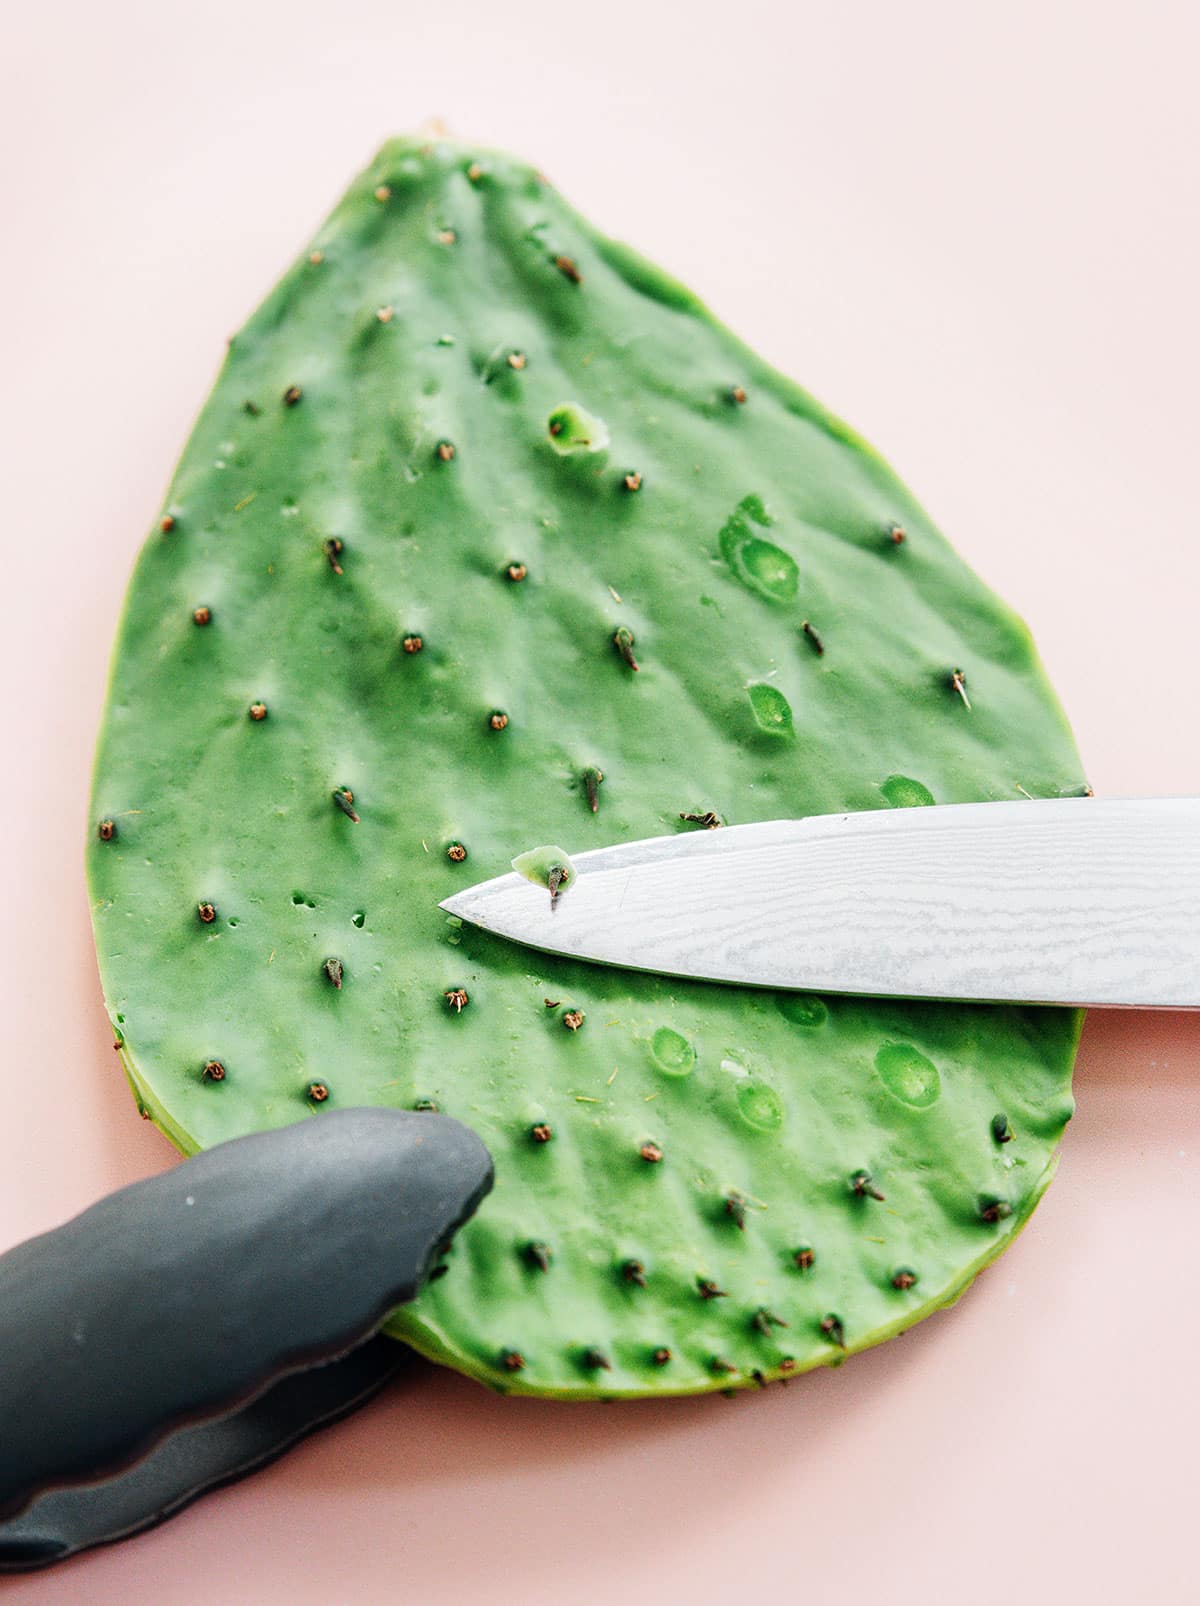 Cutting thorns off of cactus paddles